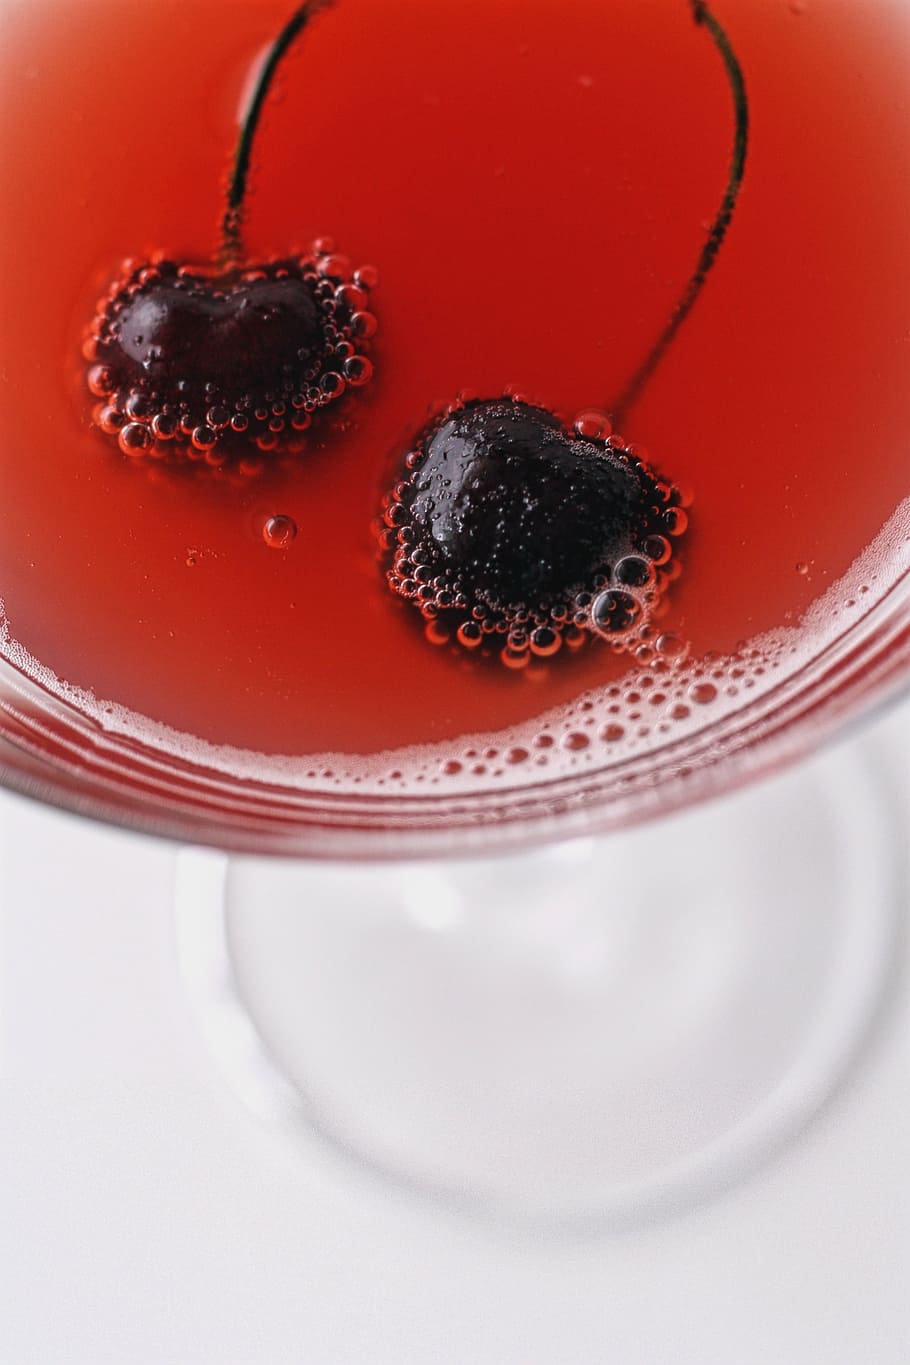 cup, juice, table, cherry, drink, cosmopolitan, cocktail, bubbles, martini glass, red